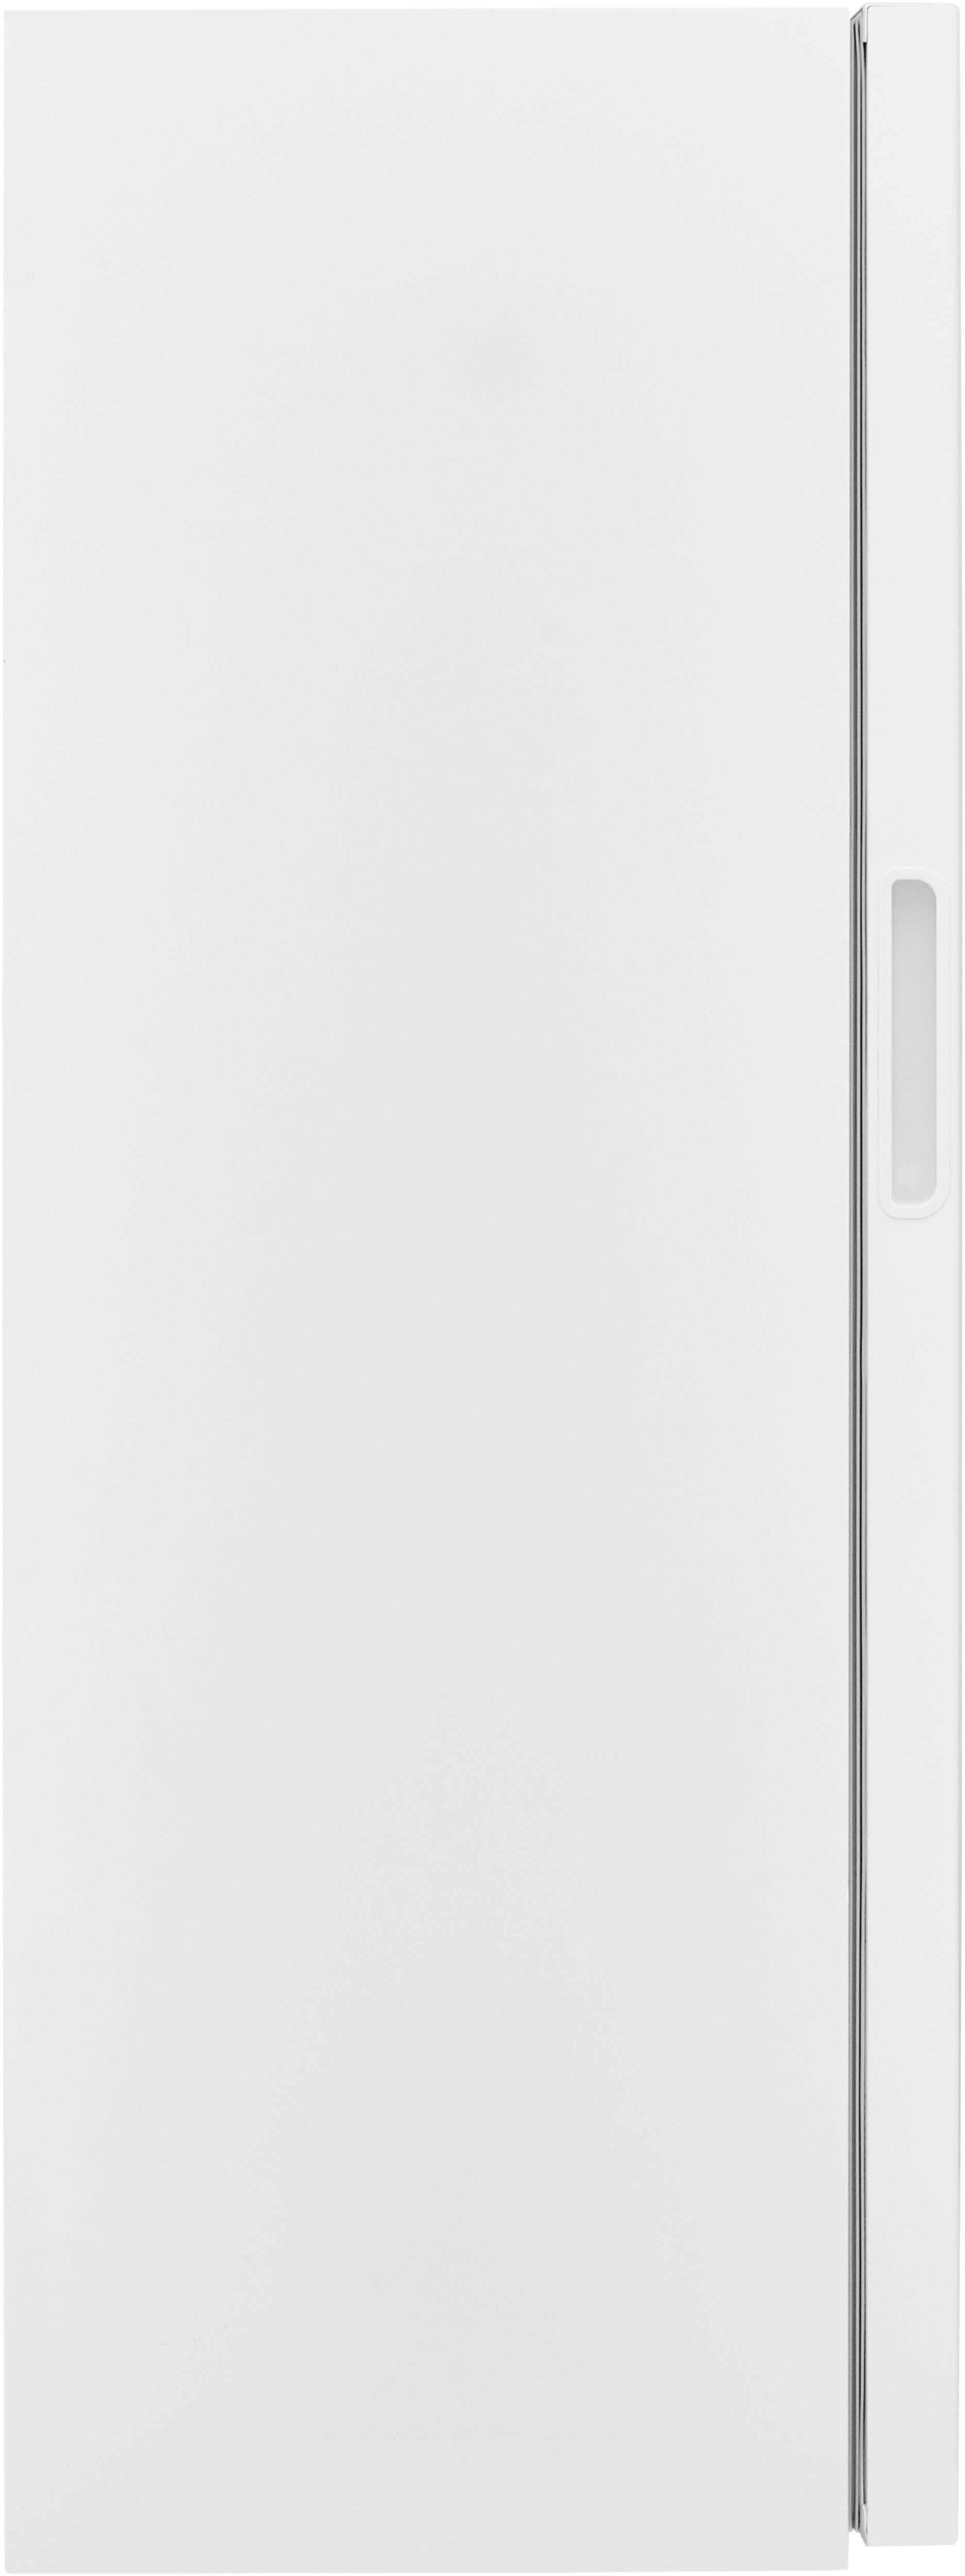 Frigidaire 20.0 cu. ft. Frost Free Upright Freezer in White FFUE2024AW -  The Home Depot